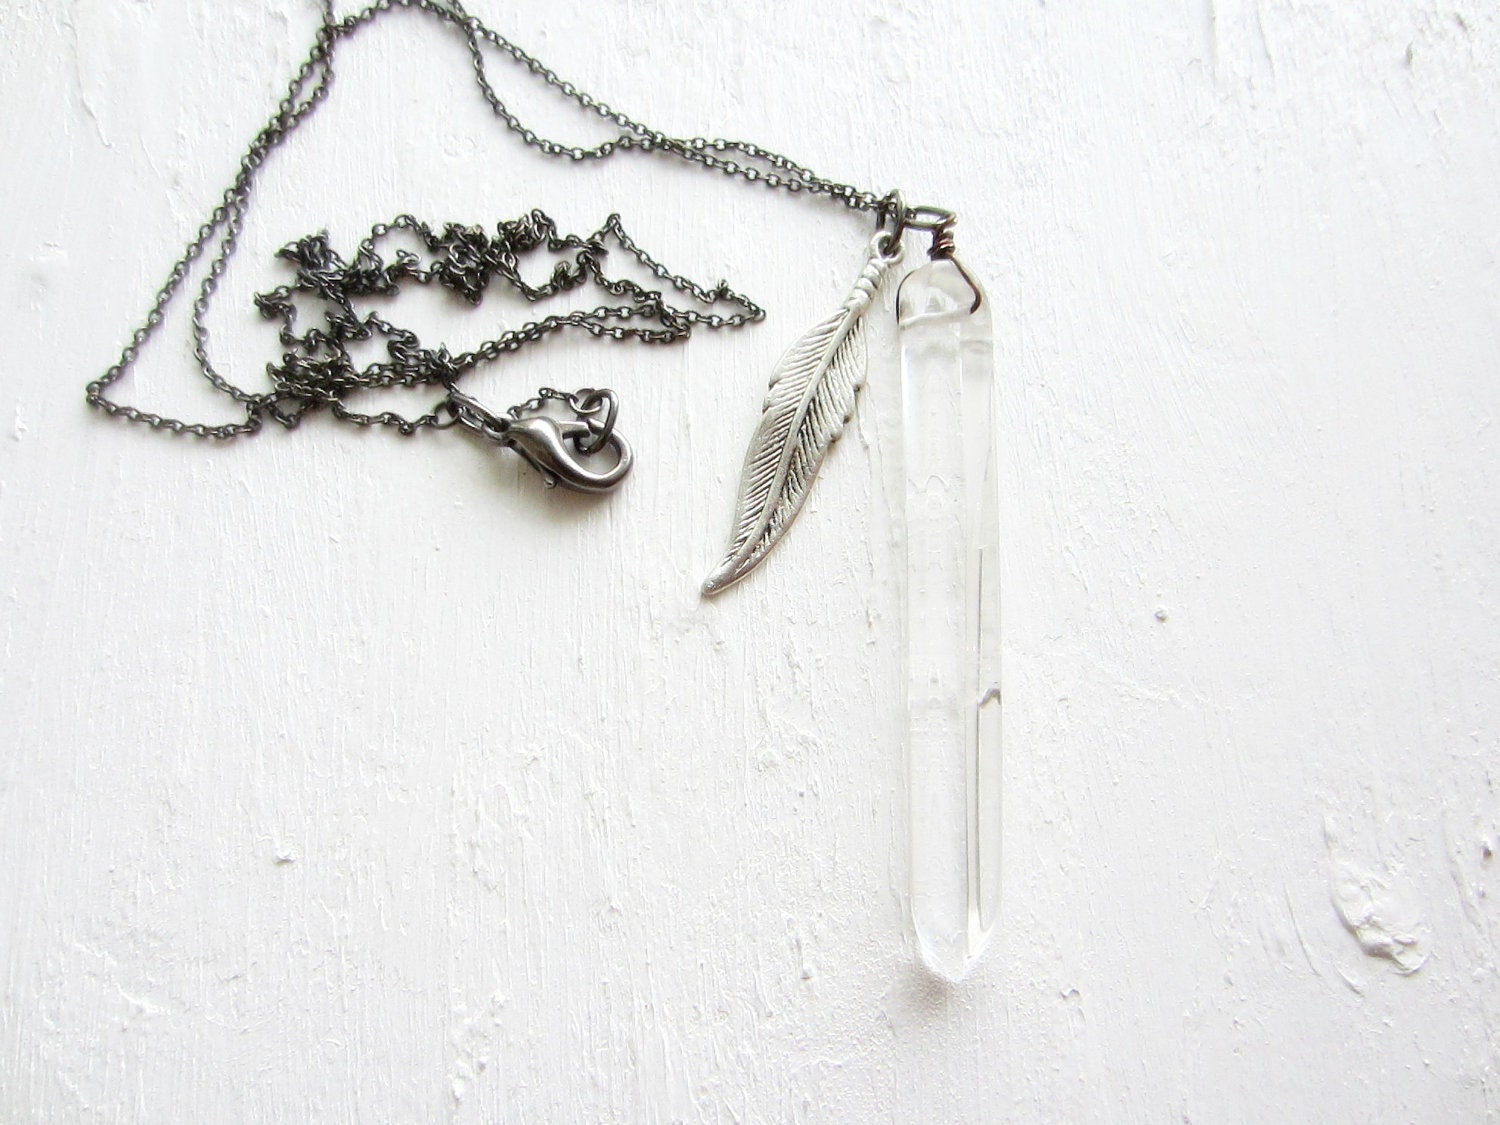 Crystal Quartz Necklace Silver Feather Charm and Rock Crystal Spike Necklace Edgy Bohemian Jewelry Gifts under 40 - REBELbyFATE